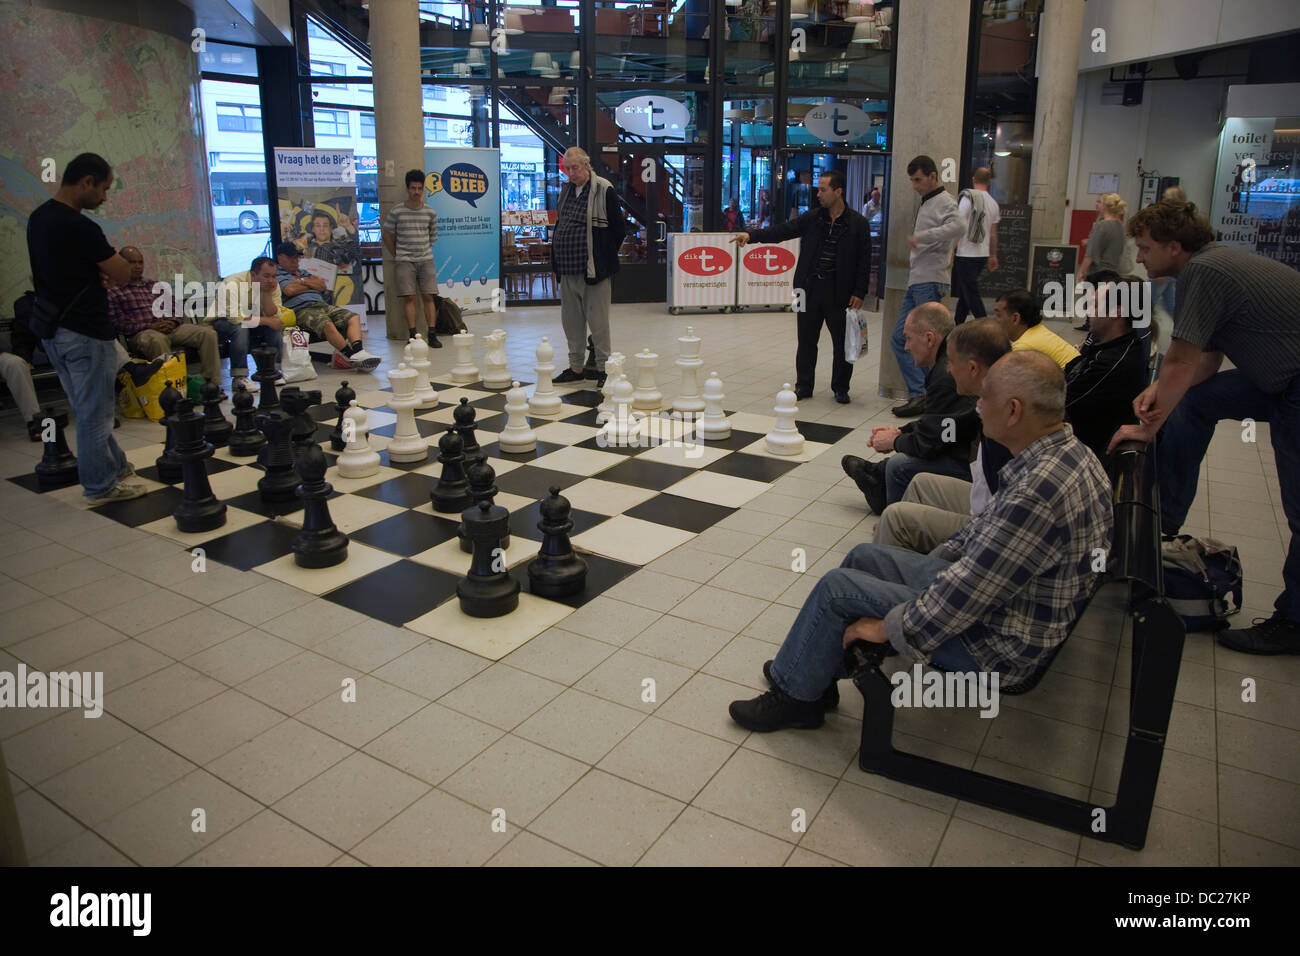 People playing chess with a giant board and pieces in the central library Rotterdam Netherlands Stock Photo